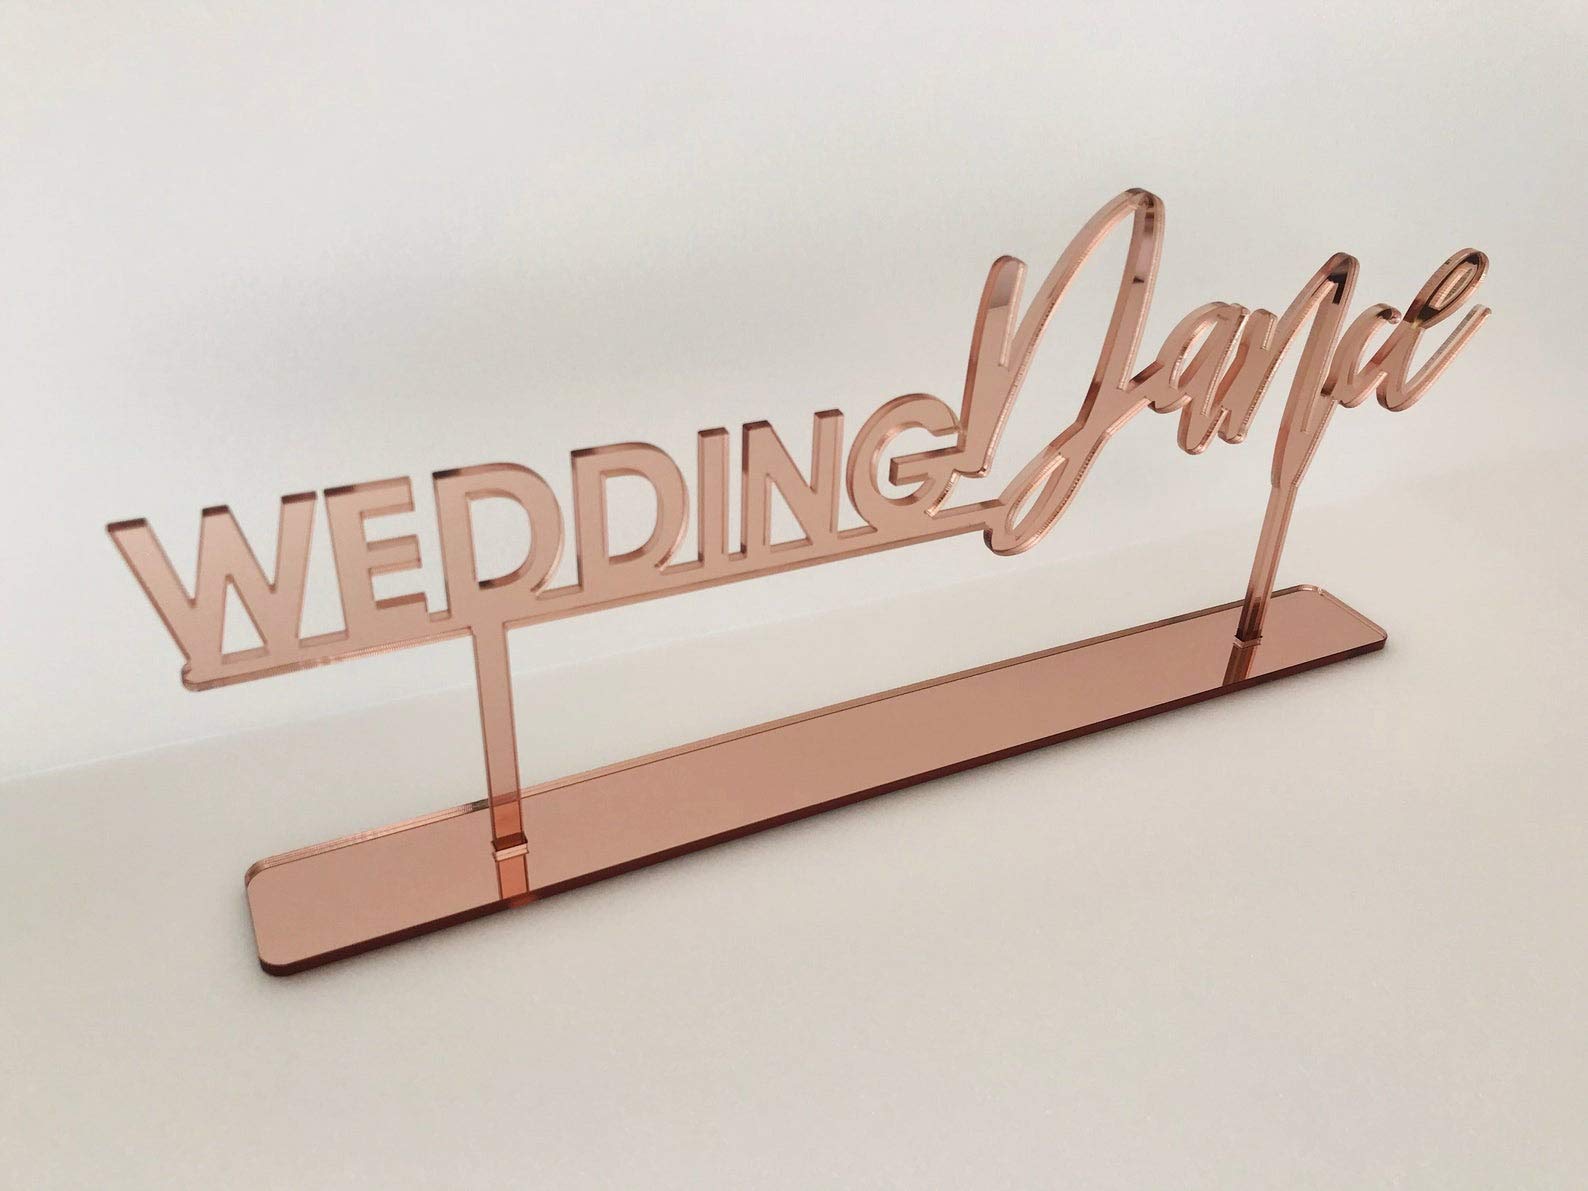 Your Custom Text Here Tabletop Sign Hashtag Personalized Wedding Calligraphy Laser Cut Acrylic Freestanding Sweetheart Table Decorations Desert Sign Party Welcome Wood Tag Home Decor Guestbook Signage